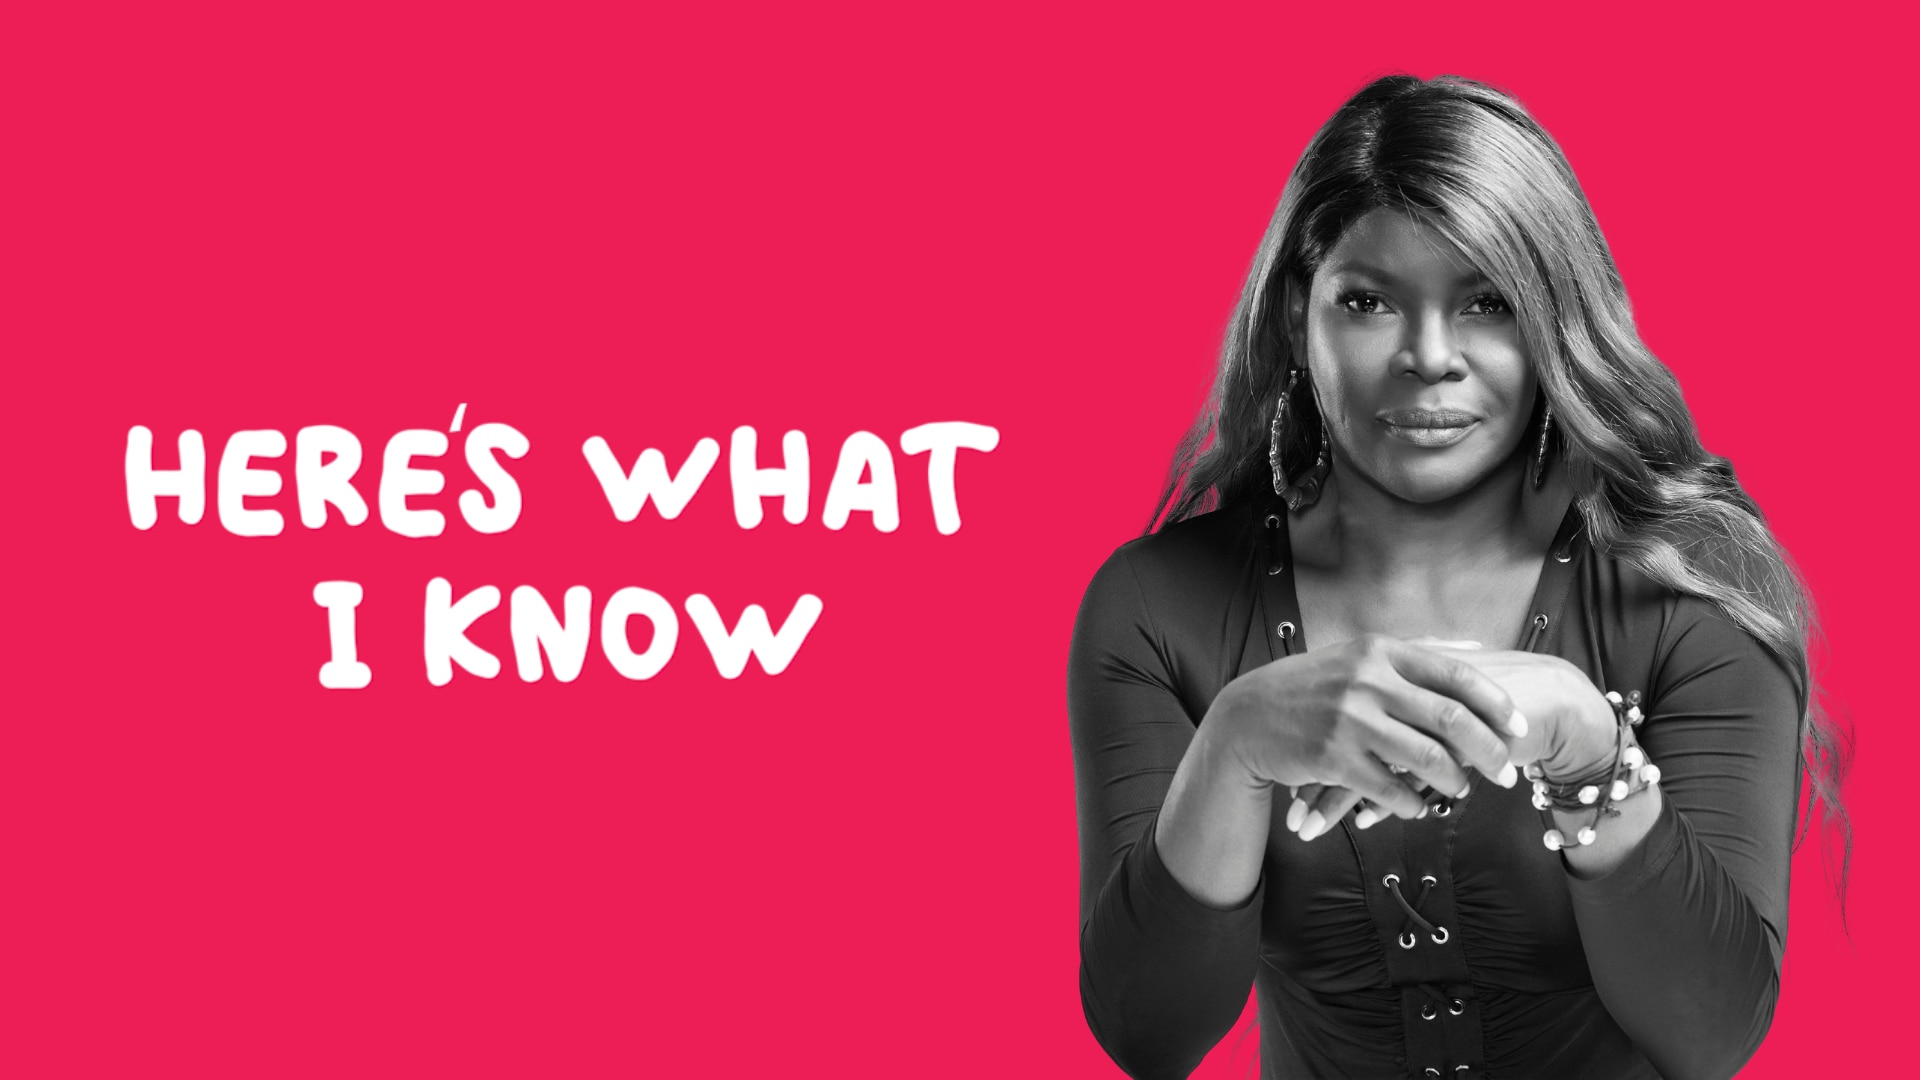 Here's What I Know: Marcia Hines' golden rule